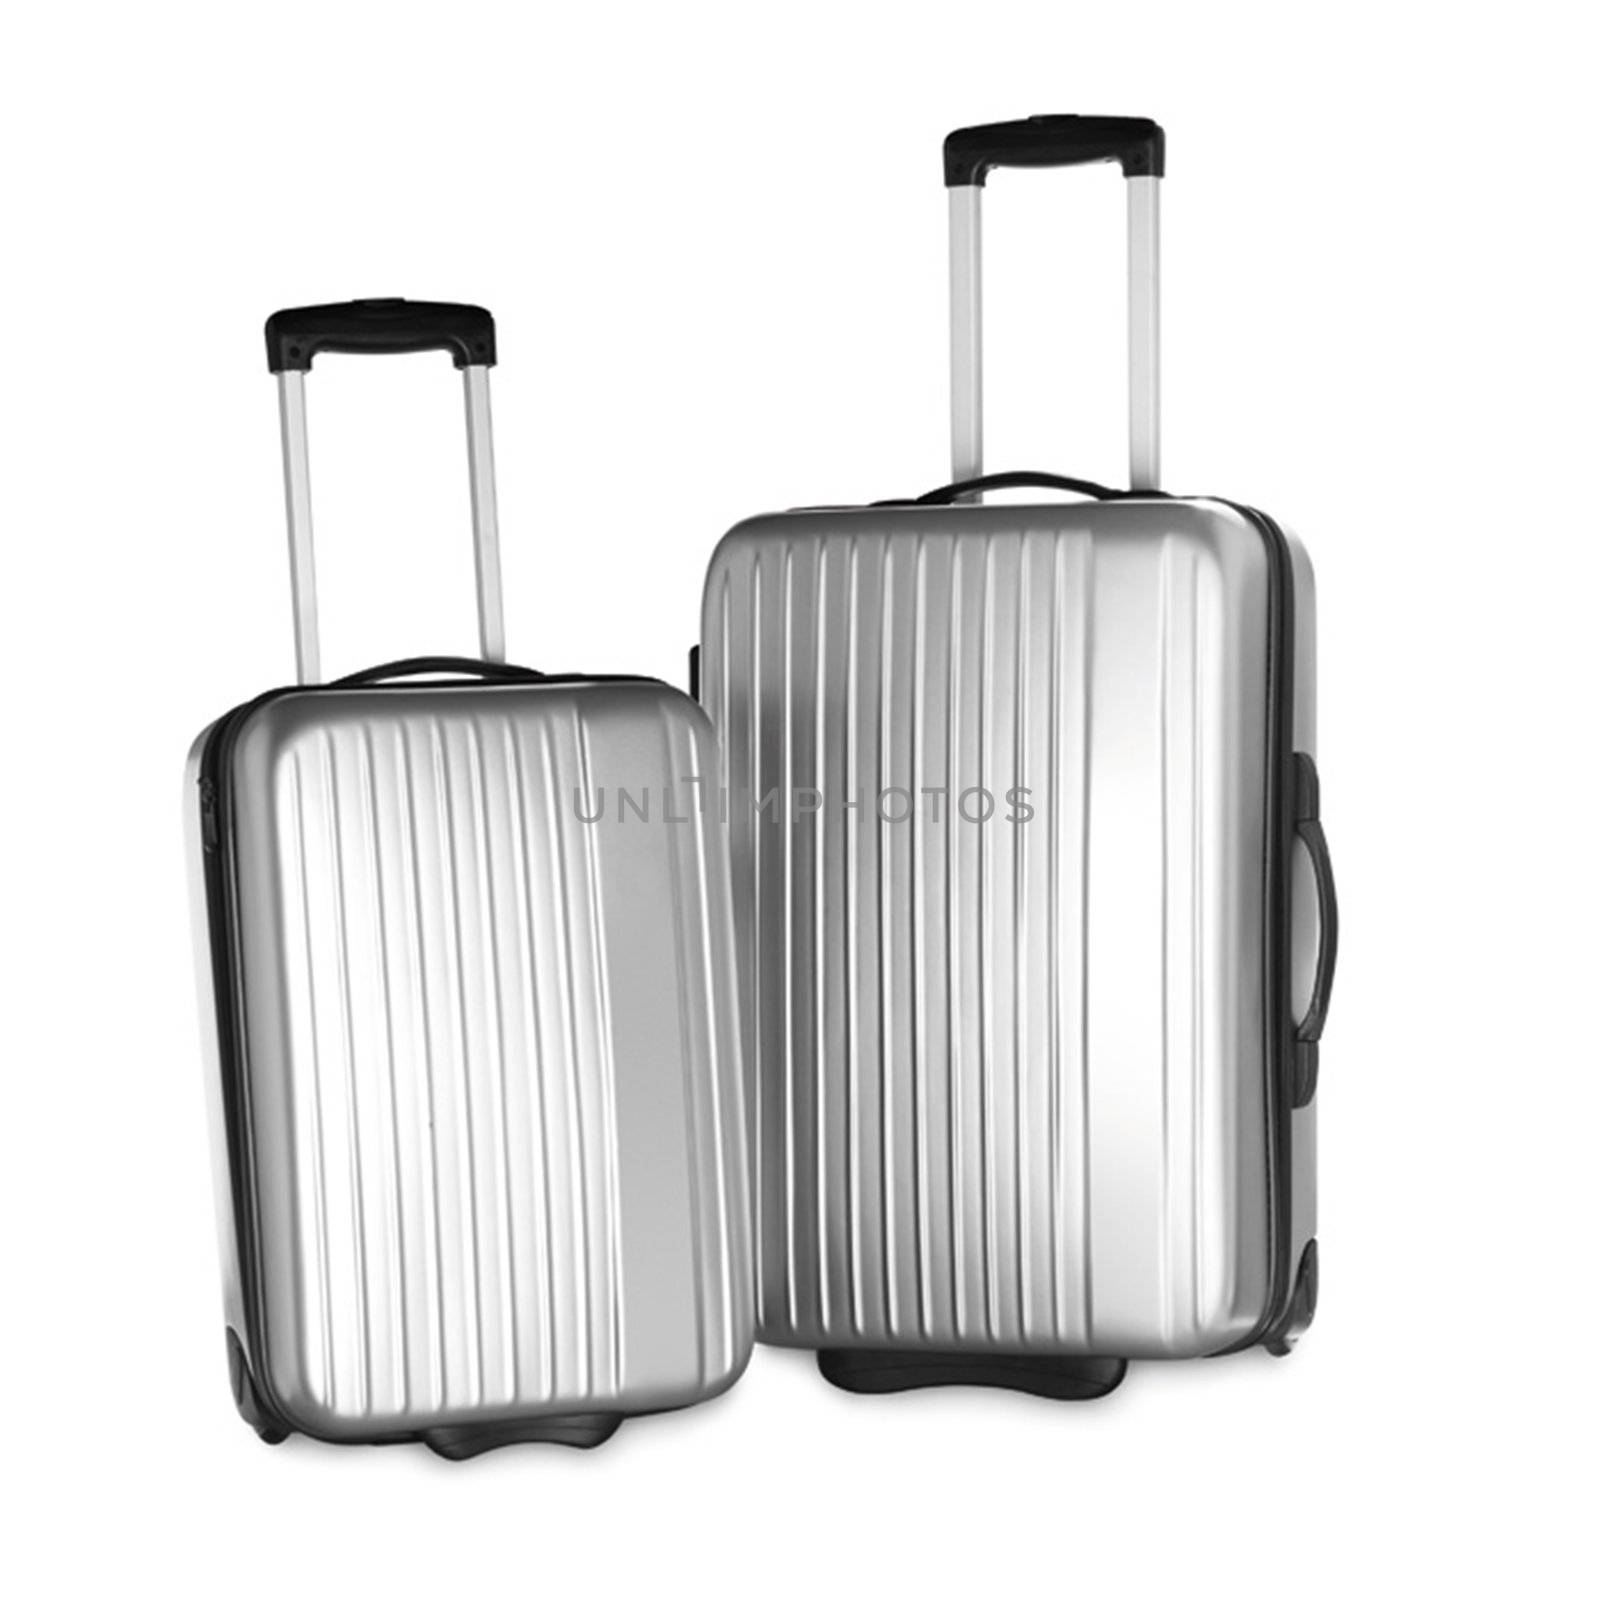 Silver suitcases with wheels by Baltus